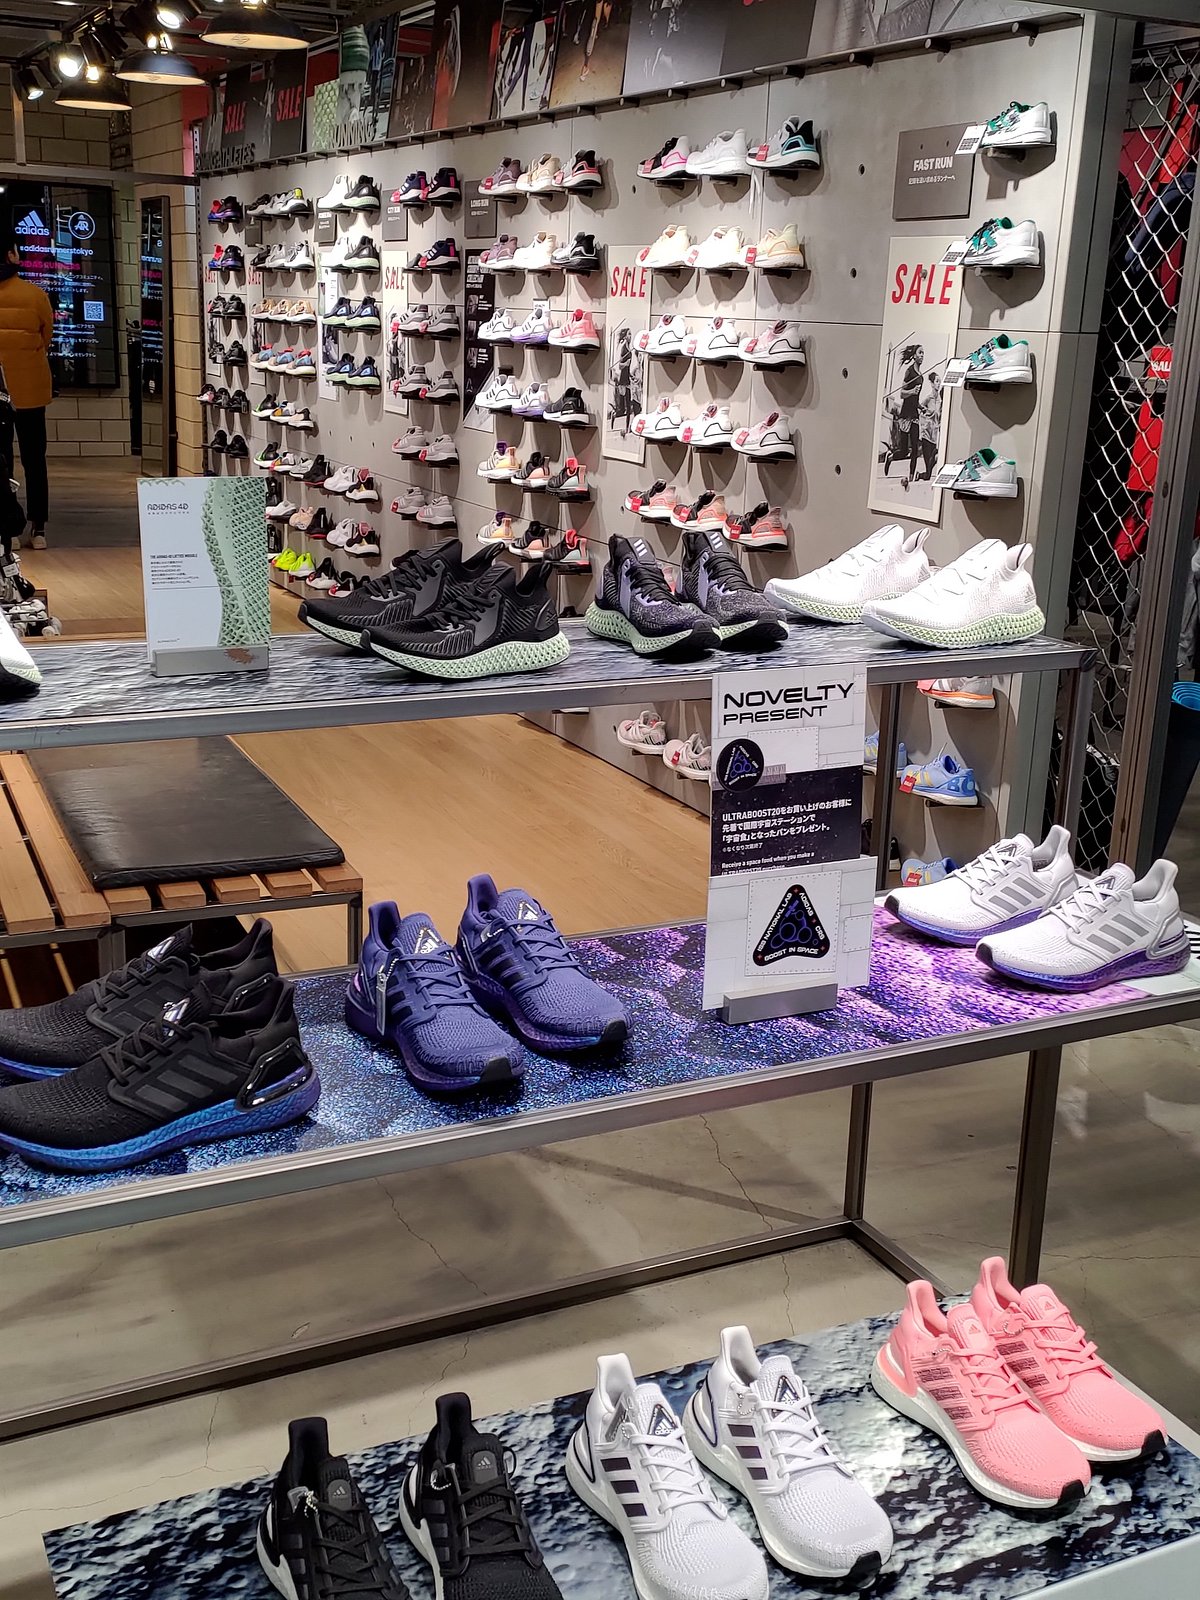 ADIDAS ORIGINALS STORE You Need to Know BEFORE You Go (with Photos)